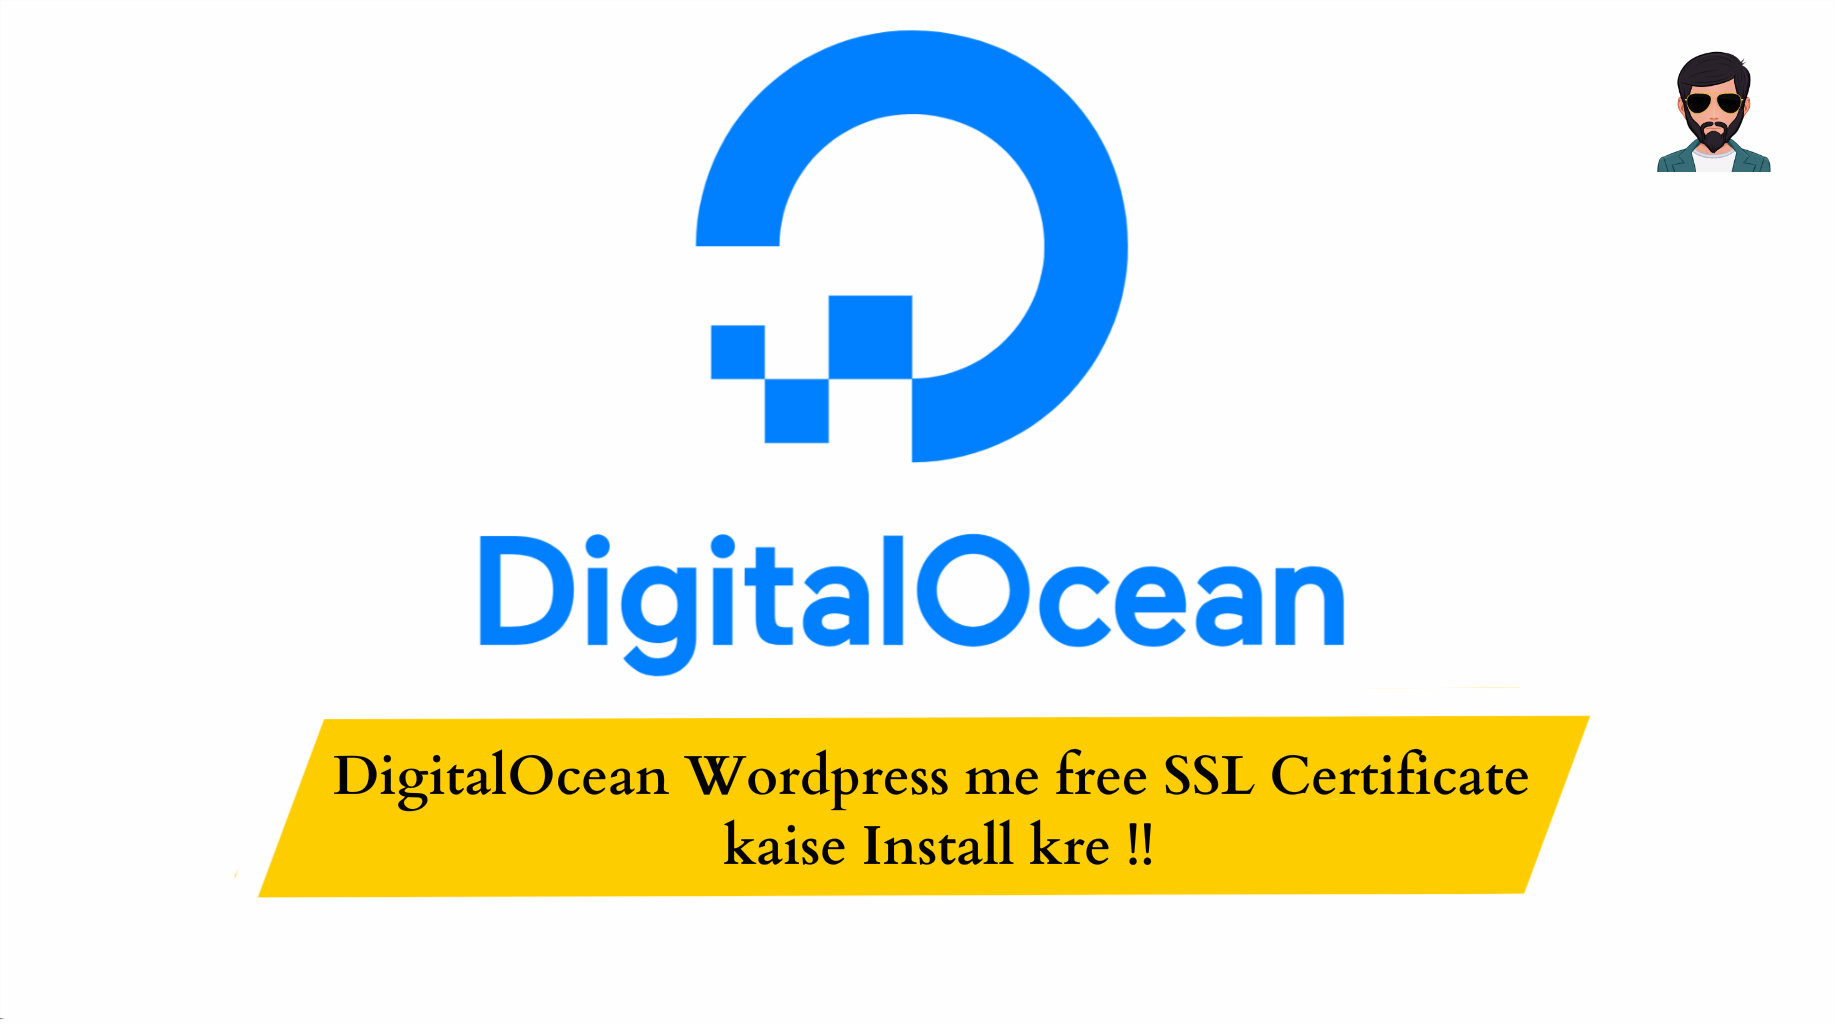 You are currently viewing DigitalOcean WordPress me free SSL Certificate kaise Install kare !!